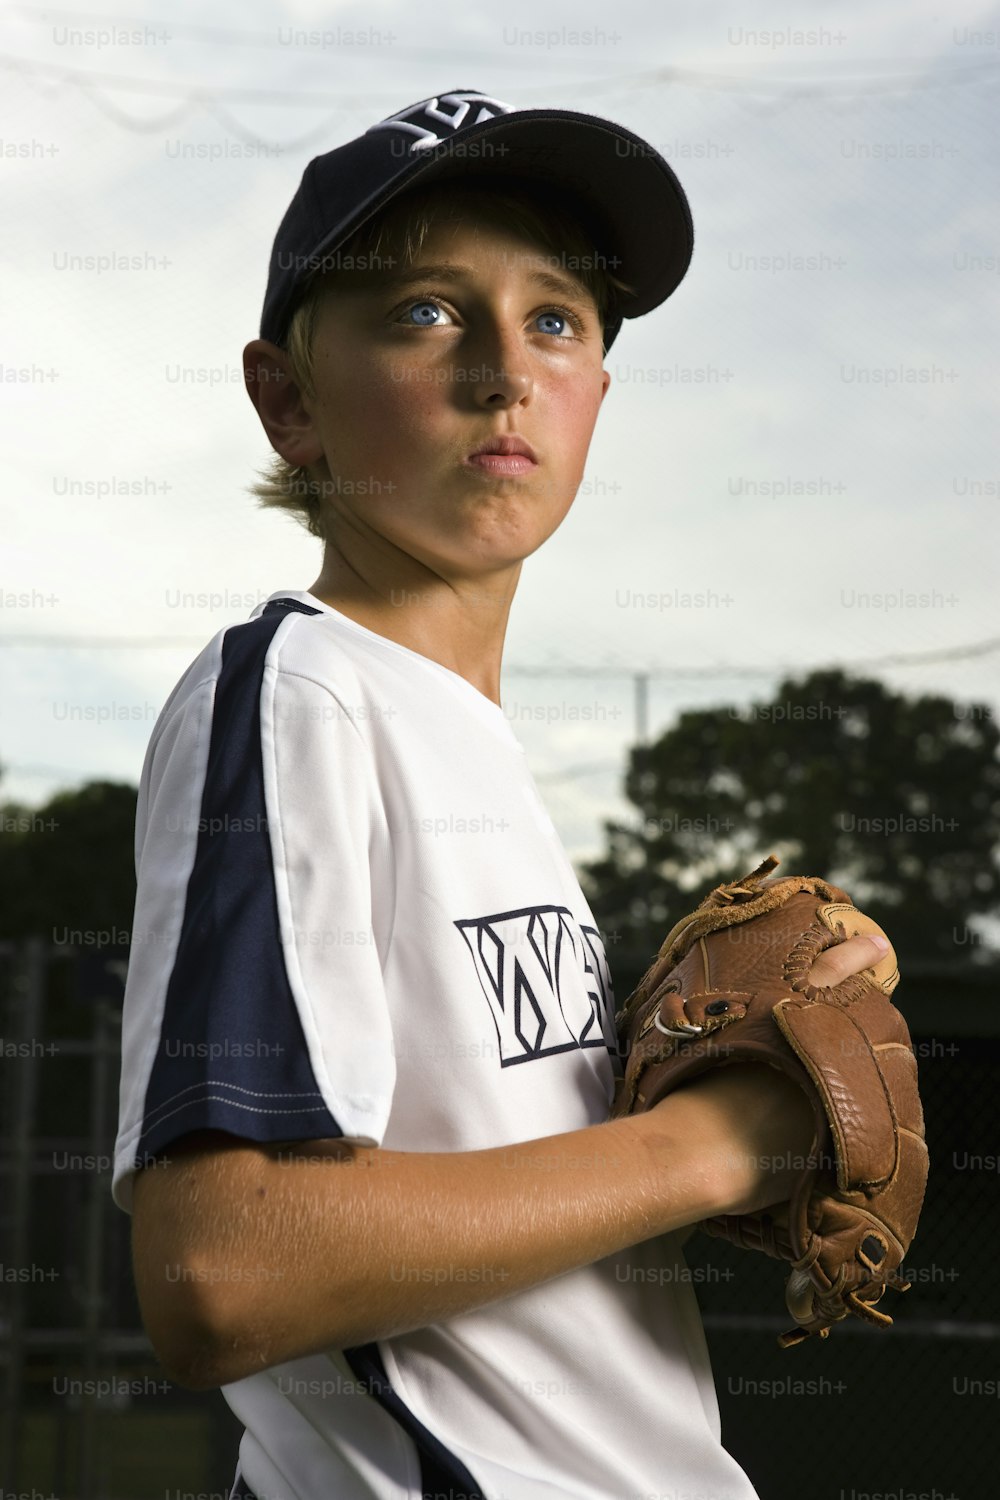 Portrait of young baseball player with glove